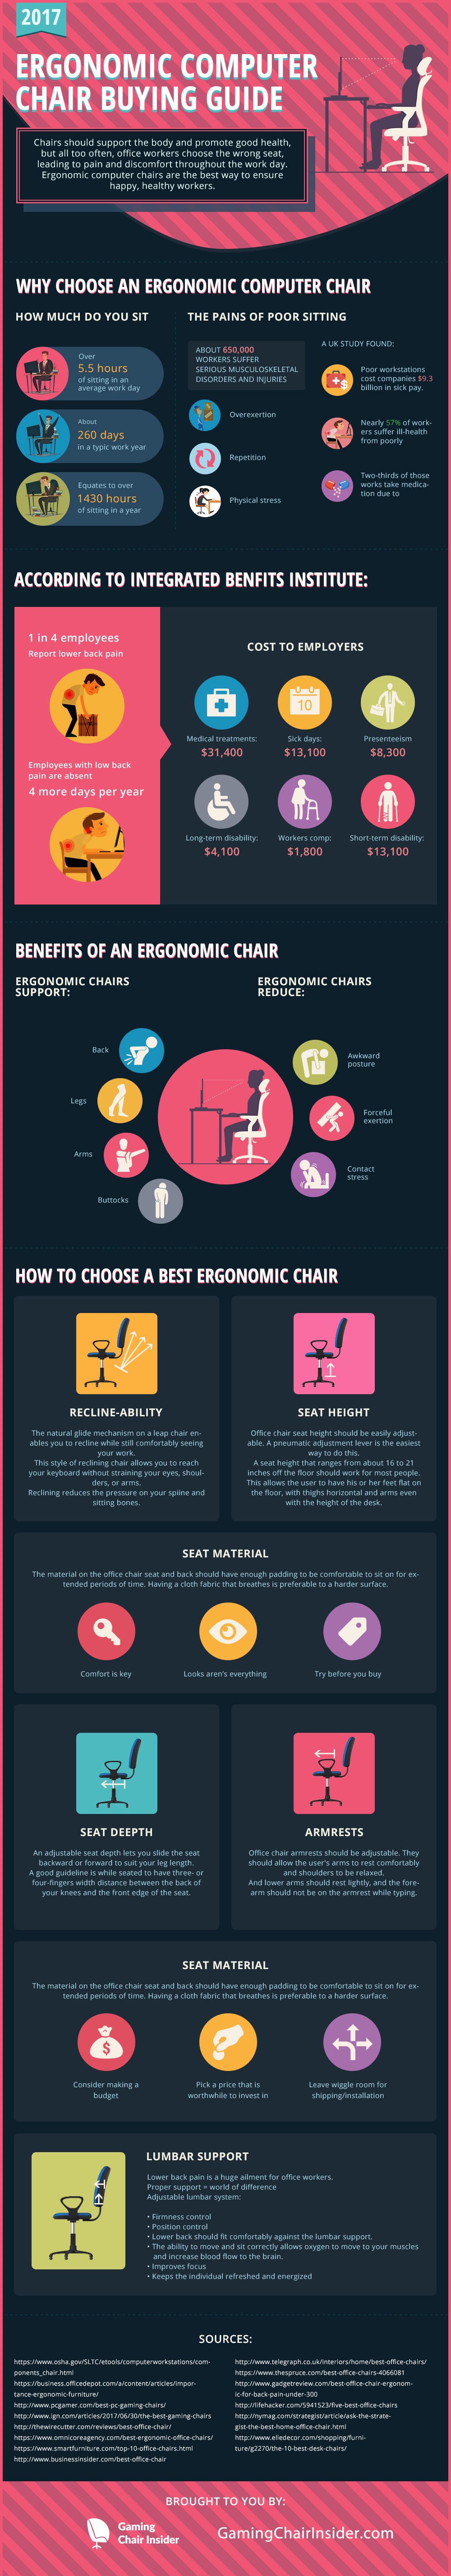 Ergonomic Office Chairs Guide Infographic